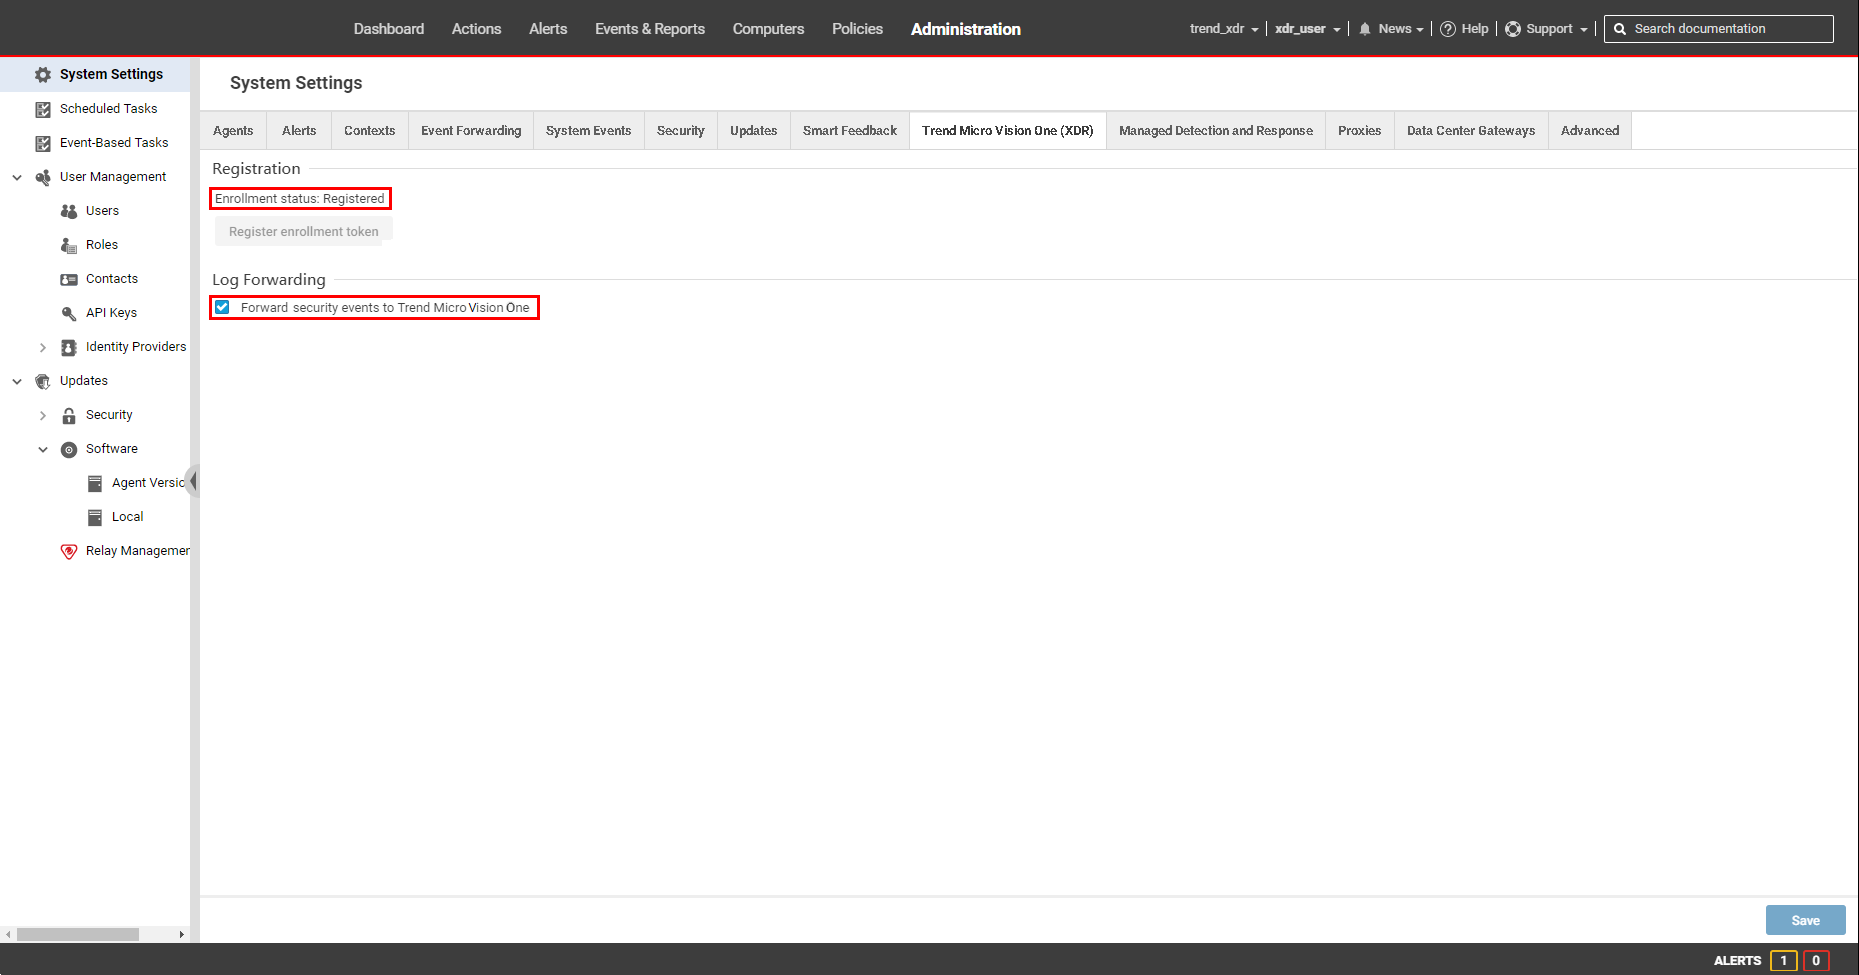 Workload Security System Settings 画面（ Trend Micro Vision One （XDR）タブが表示されています）